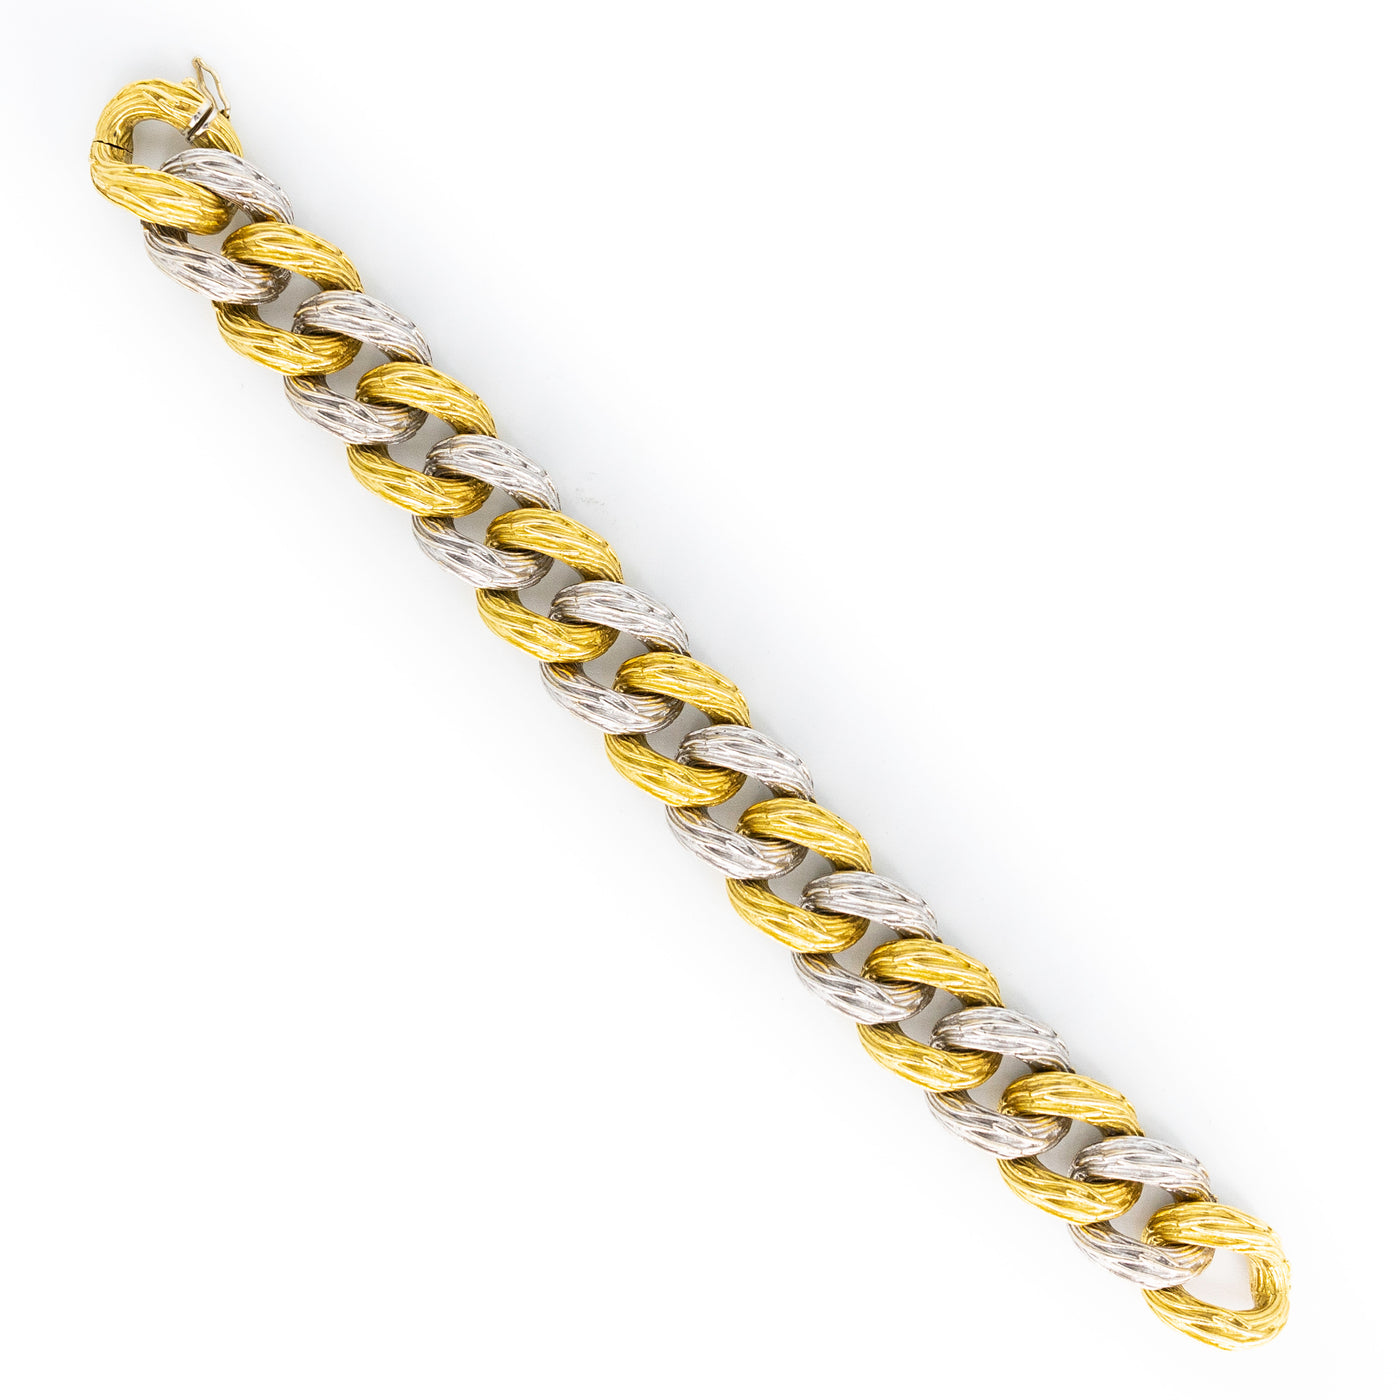 VAN CLEEF & ARPELS 18K YELLOW AND WHITE GOLD CURBLINK BRACELET c.1960s